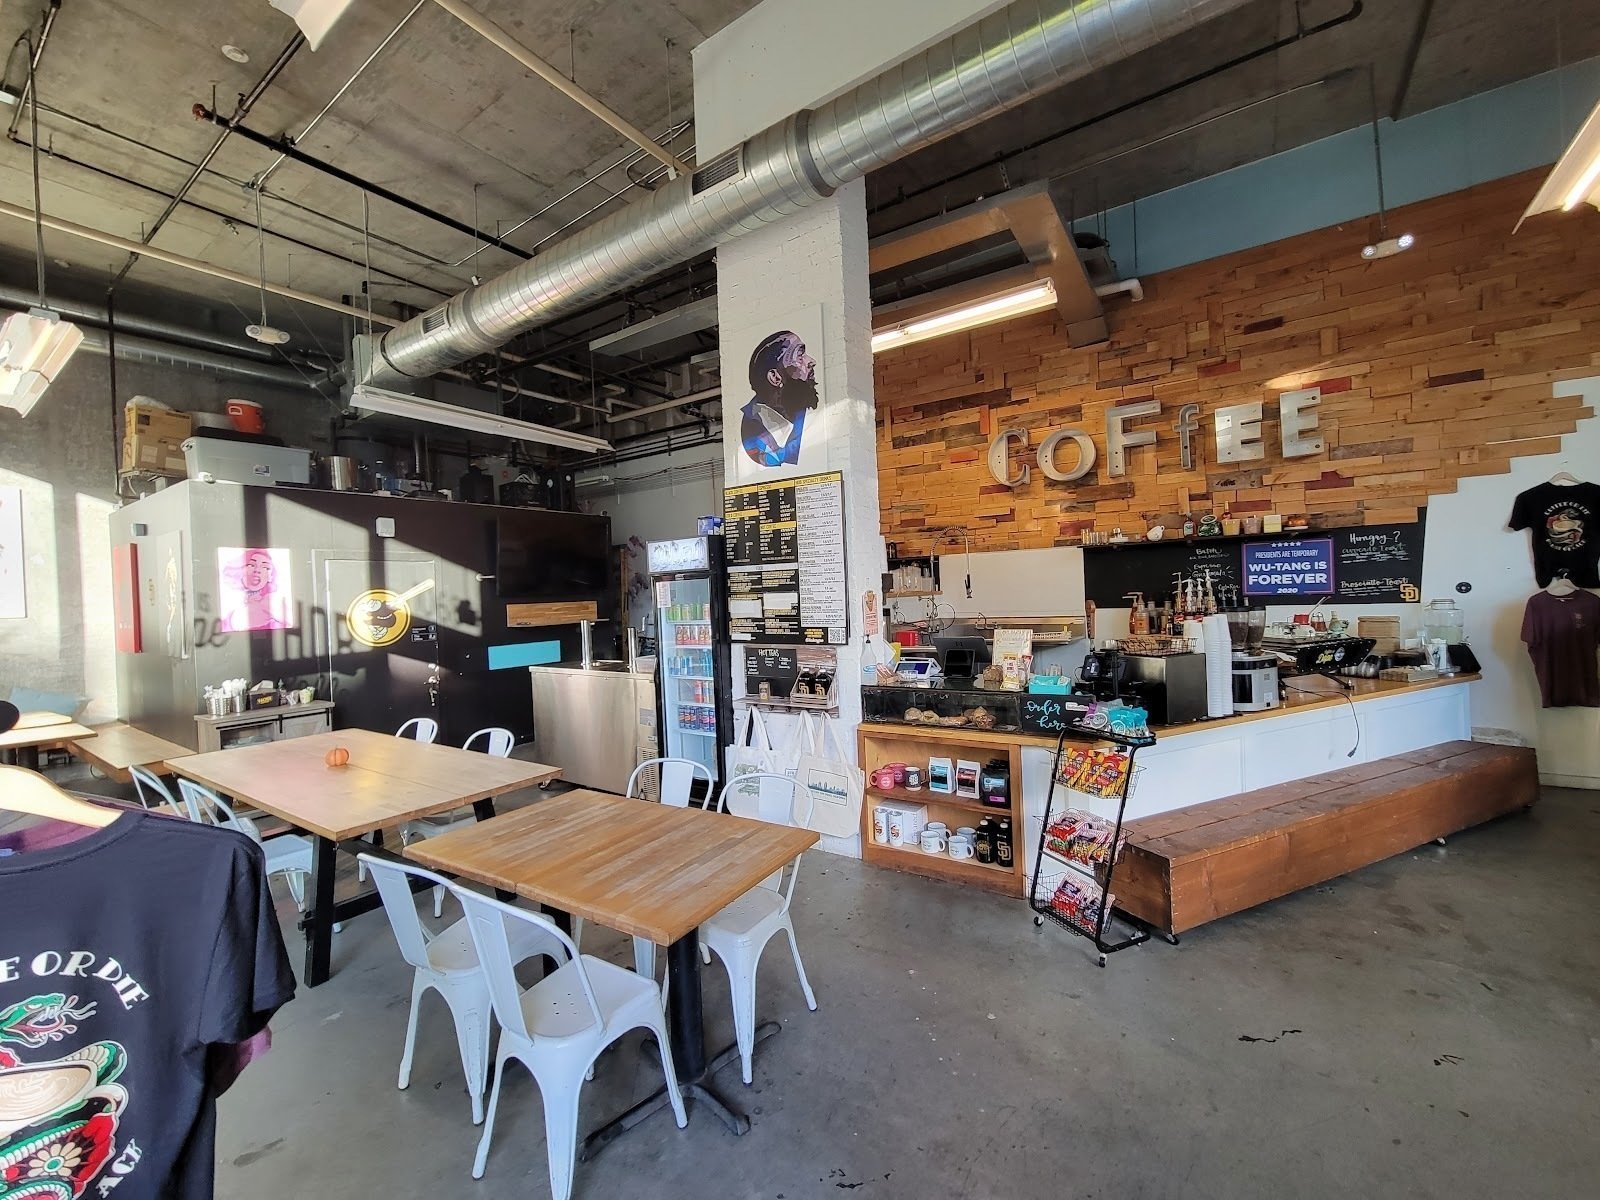 <span class="translation_missing" title="translation missing: en.meta.location_title, location_name: Hob Coffee East Village, city: San Diego">Location Title</span>